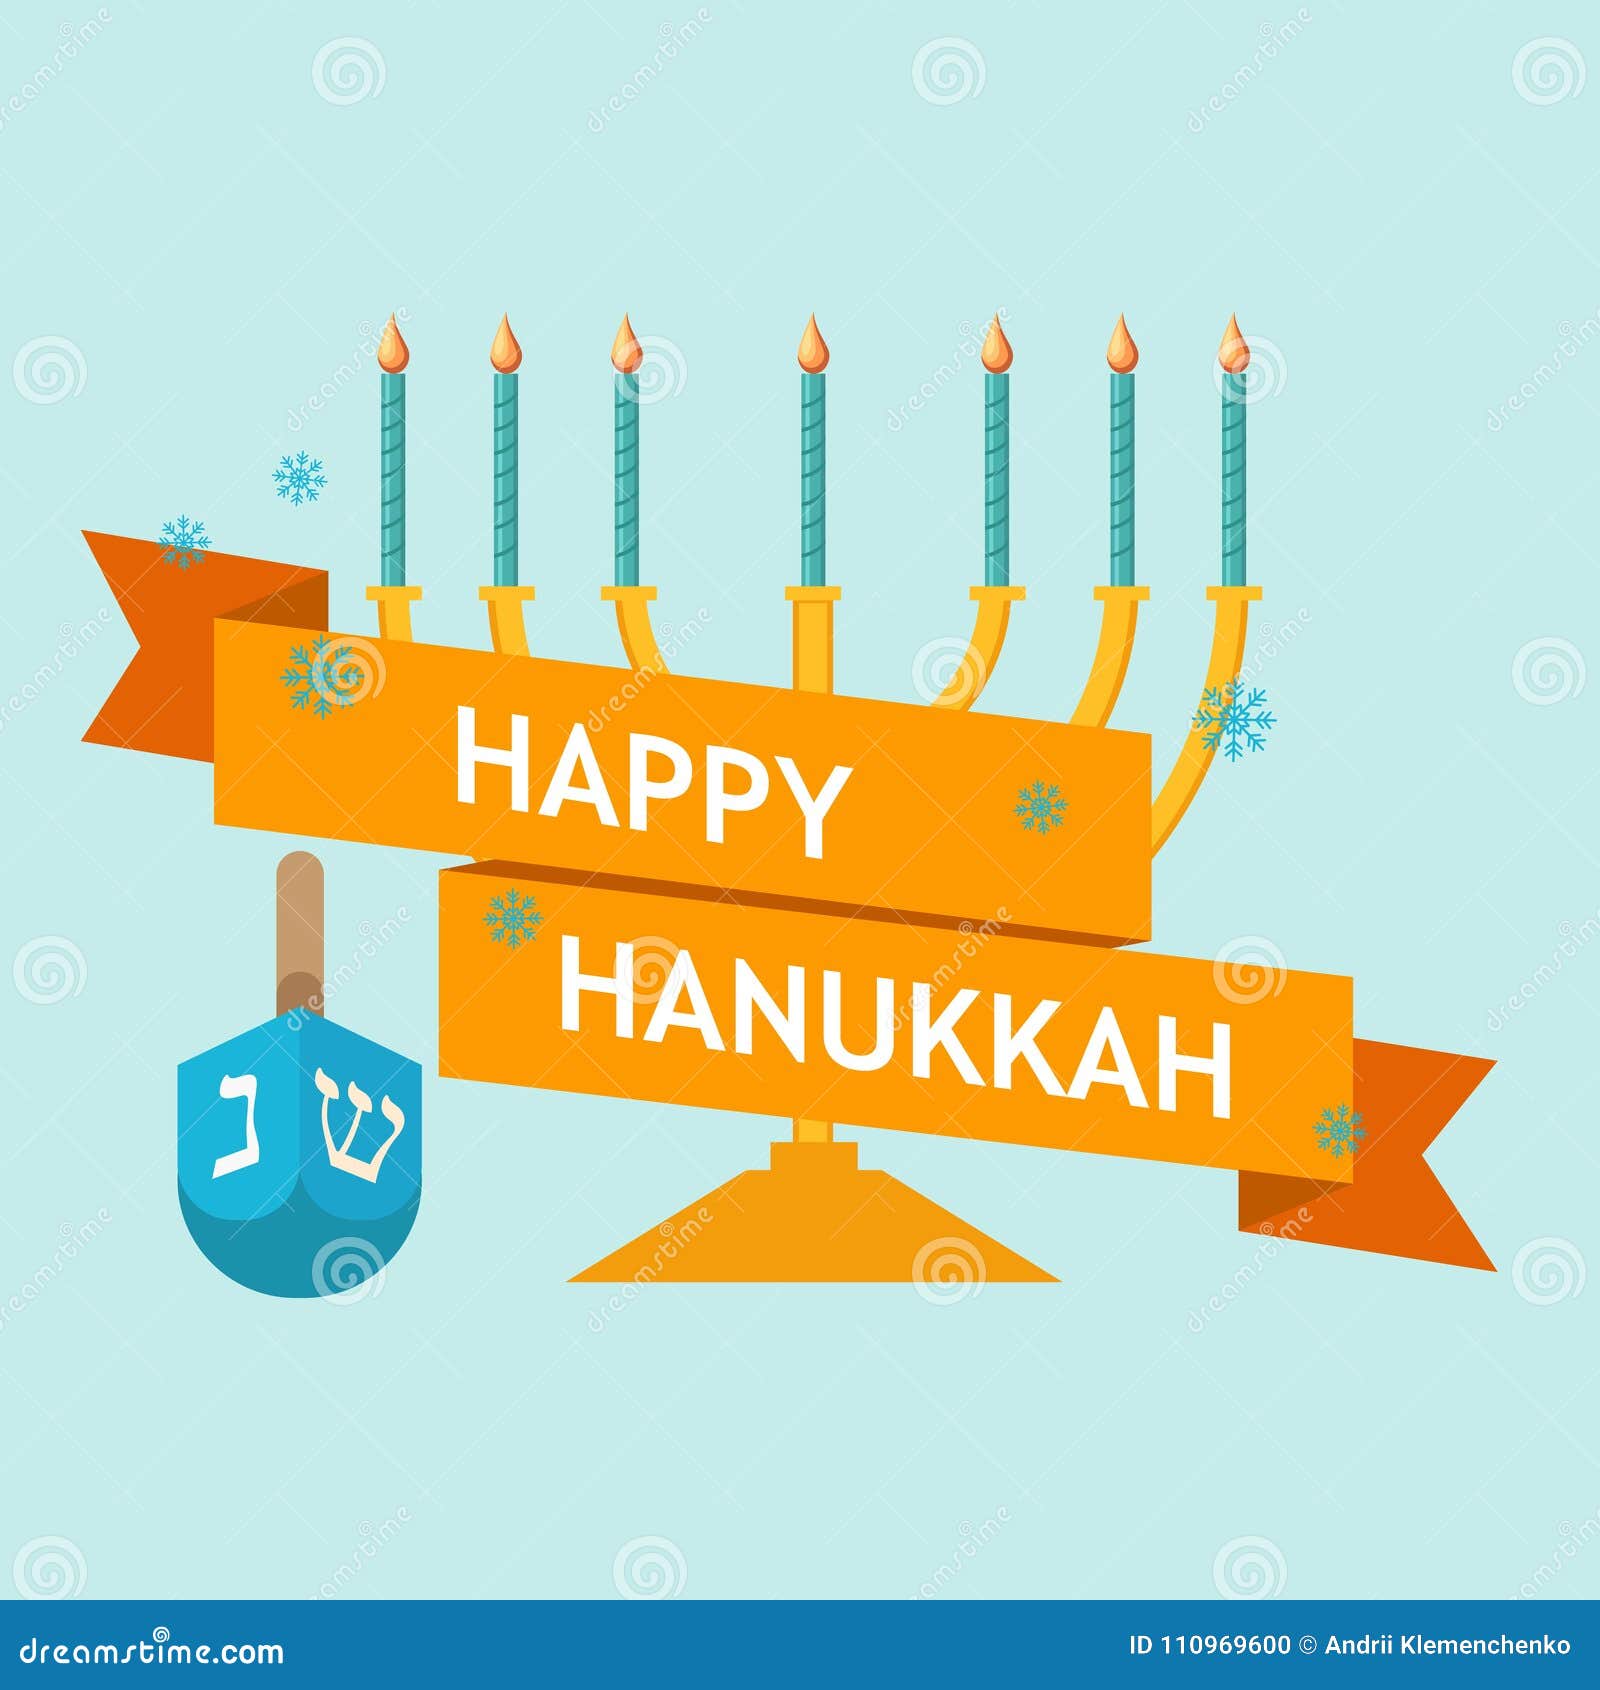 Hanukkah Sale Or Discount Design For An Emblem, Sticker Or Logo With Menorah With Burning ...